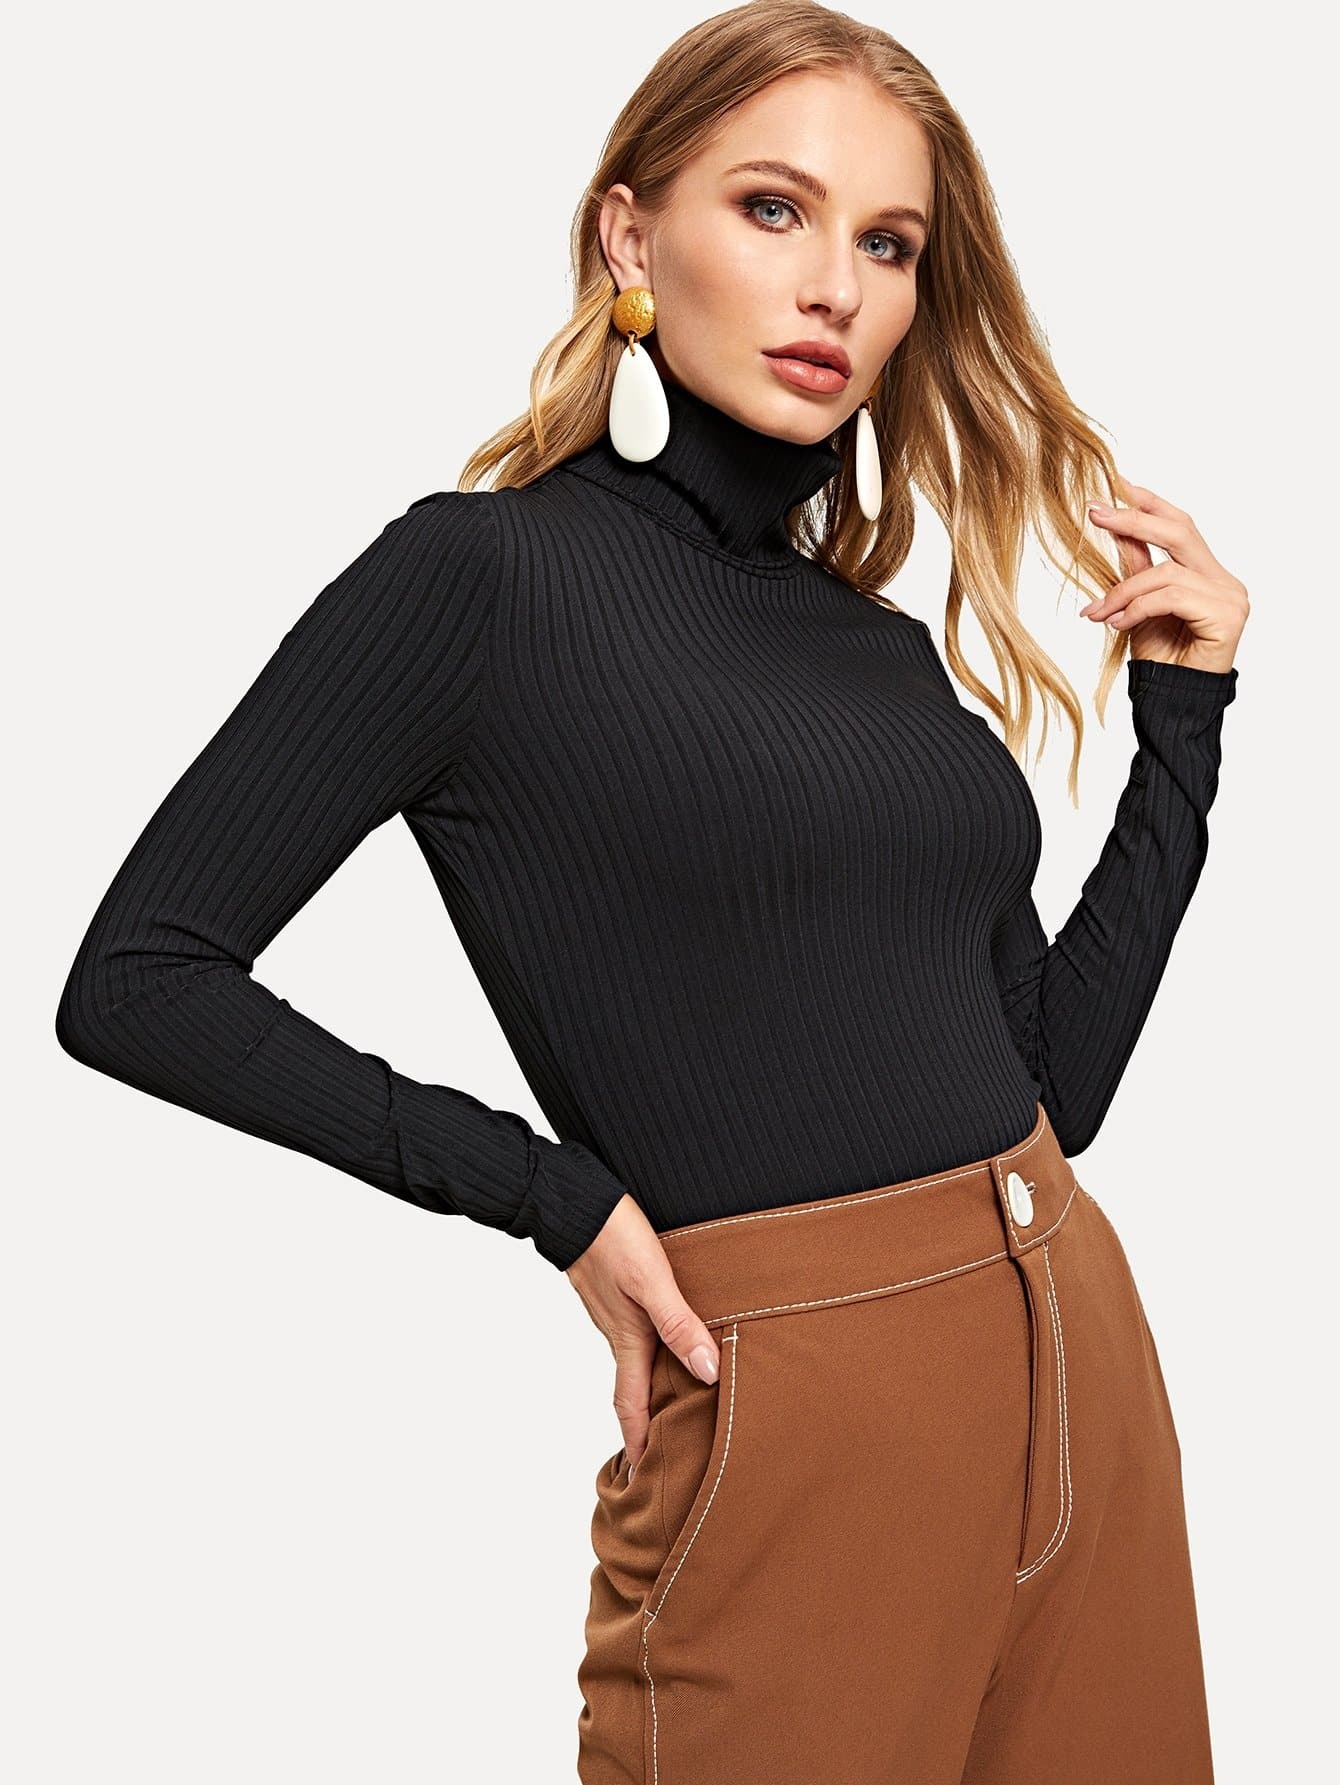 Long Sleeve High Neck Rib-knit Form Fitted Tee Top